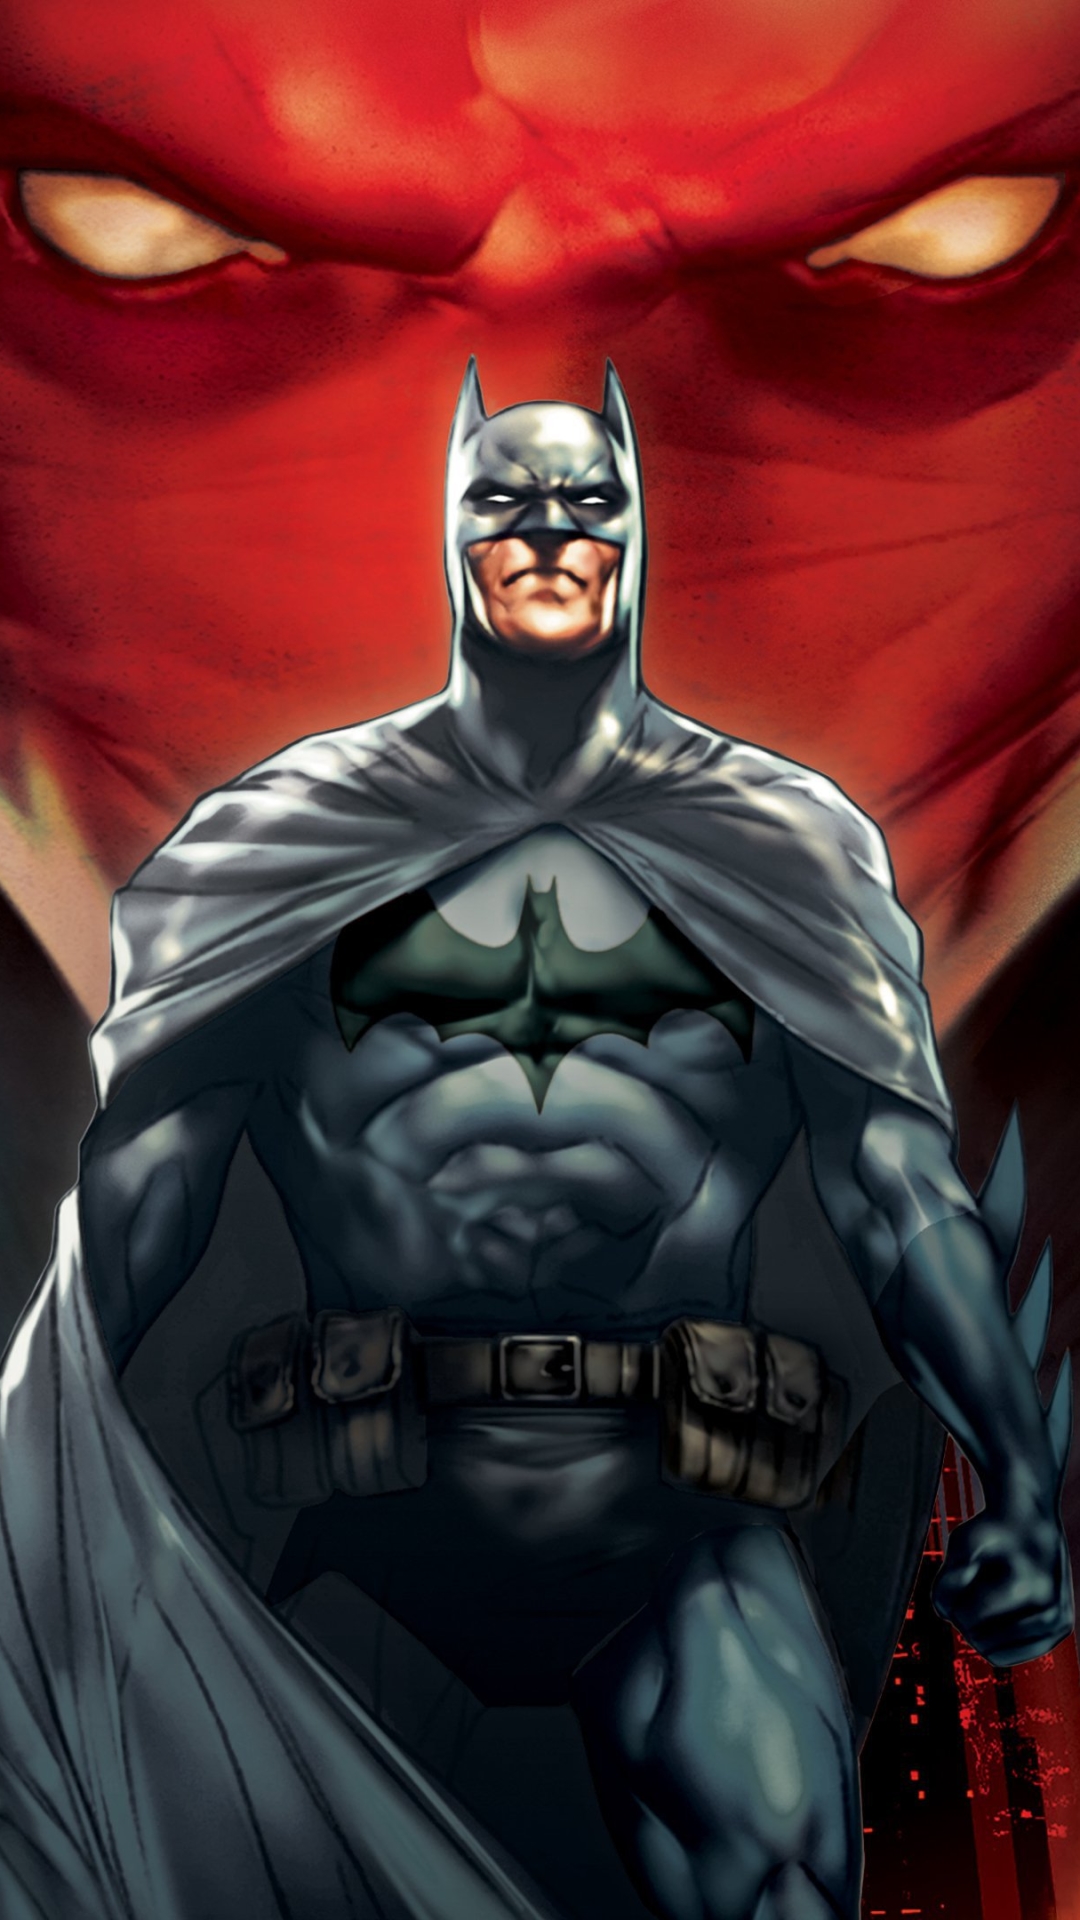 Batman: Under the Red Hood Phone Wallpaper - Mobile Abyss